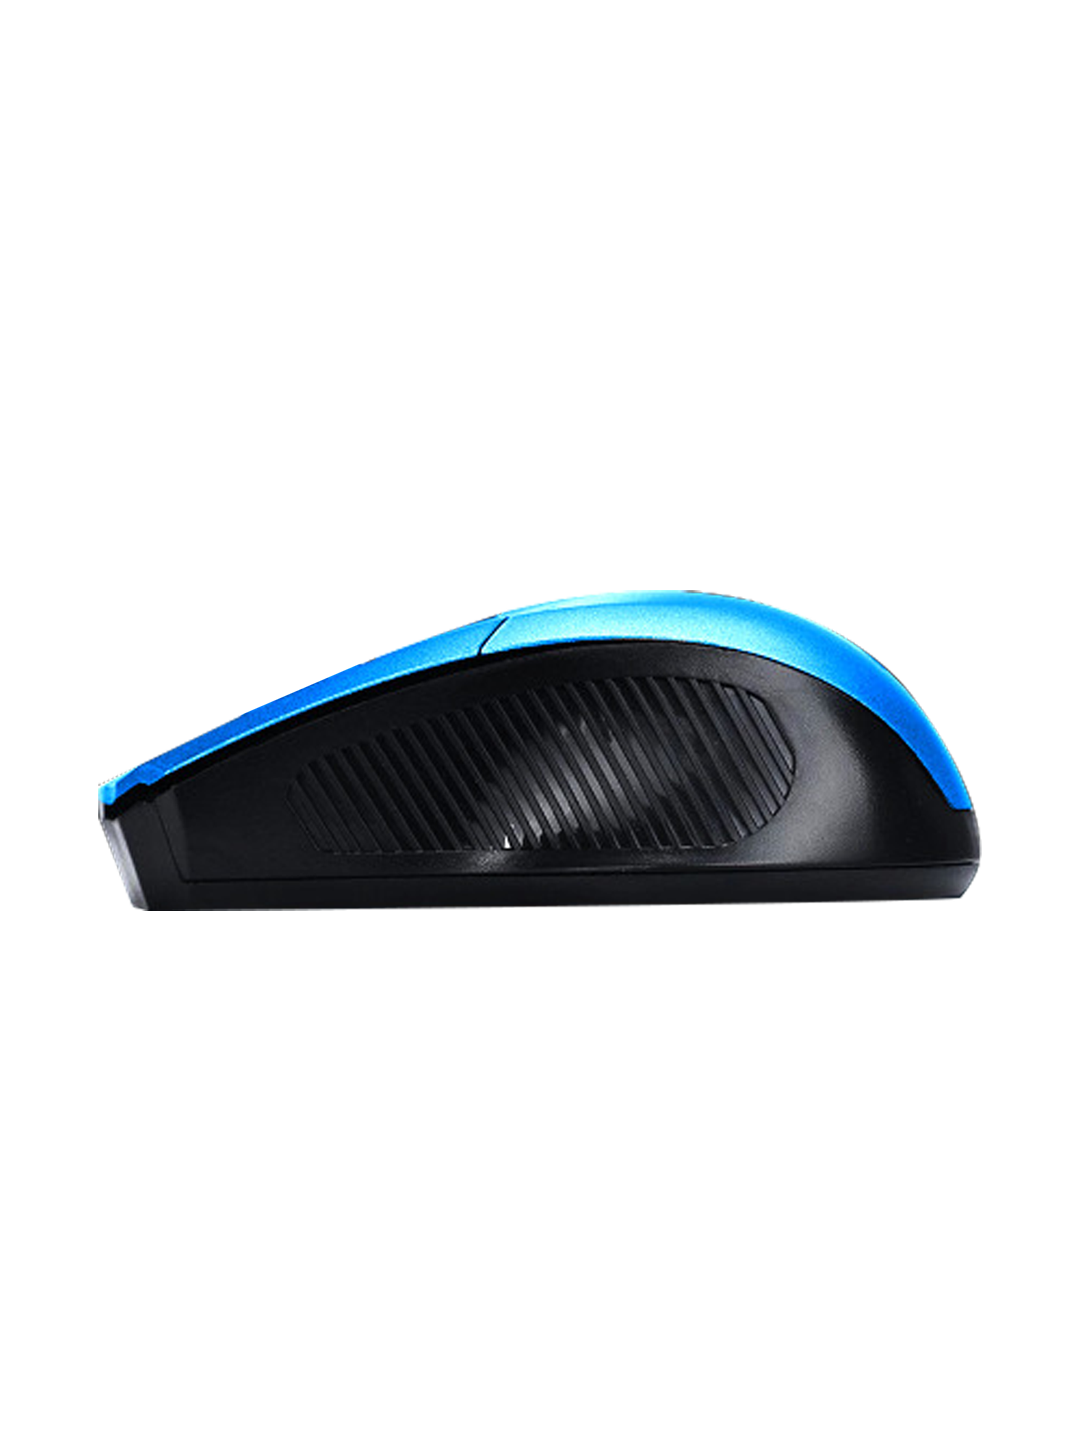 Foxin Elite Blue Wireless Mouse with Nano Receiver Media